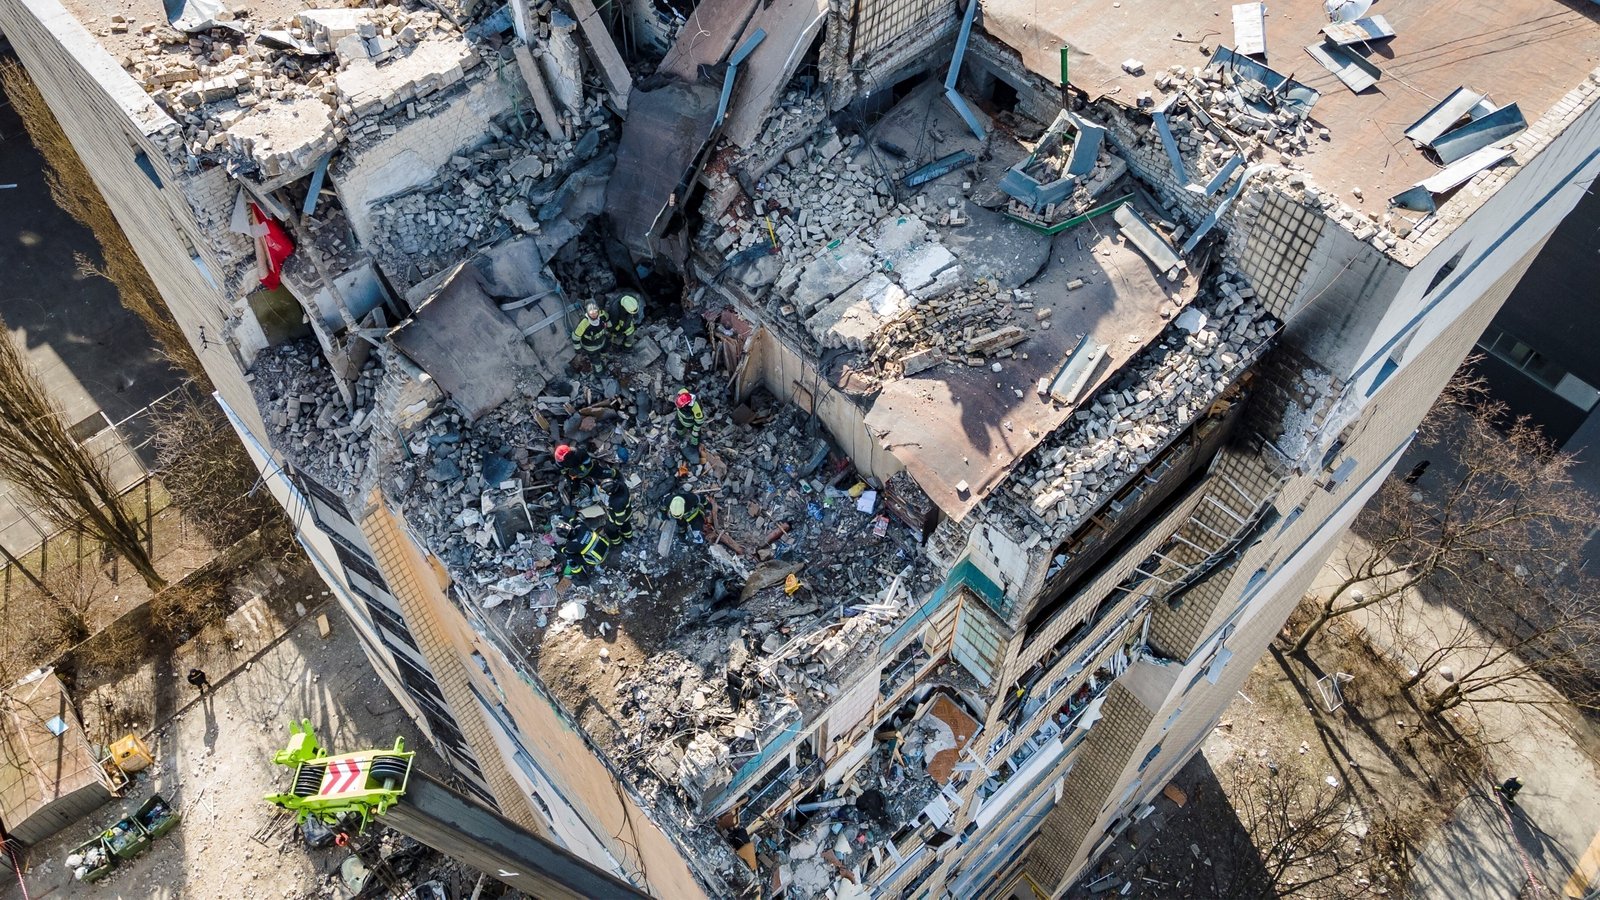 Image - Firefighters work in the rubble of a residential building which was hit by debris from a downed rocket in Kyiv